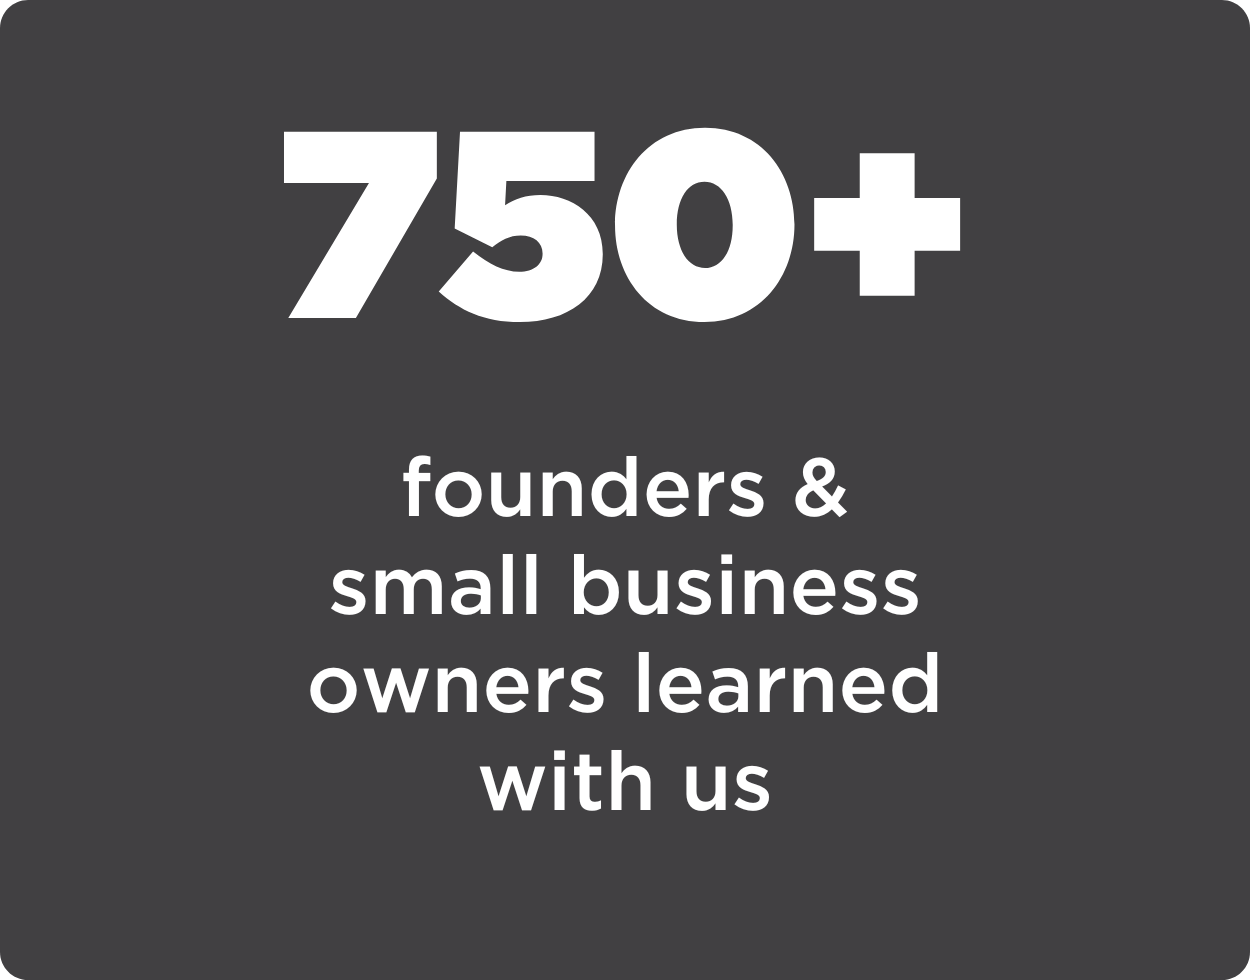 750+ founders & small business owners learned with us